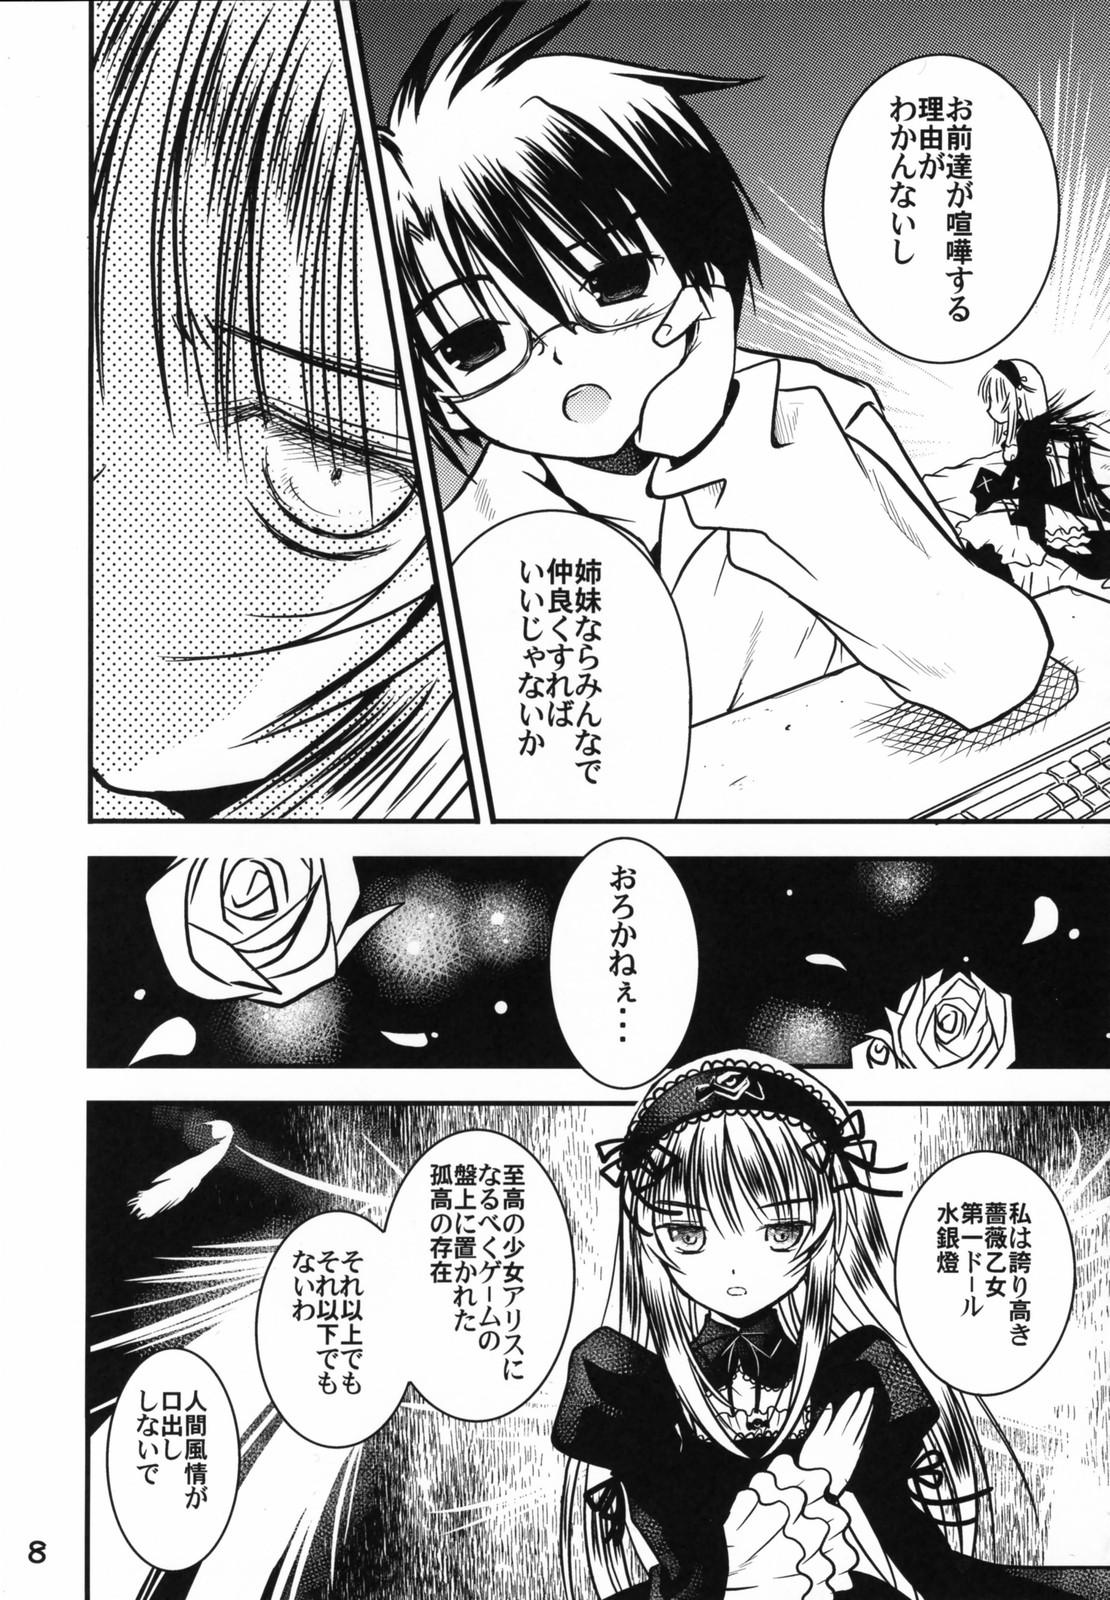 Three Some A caprice - Rozen maiden Webcamchat - Page 7